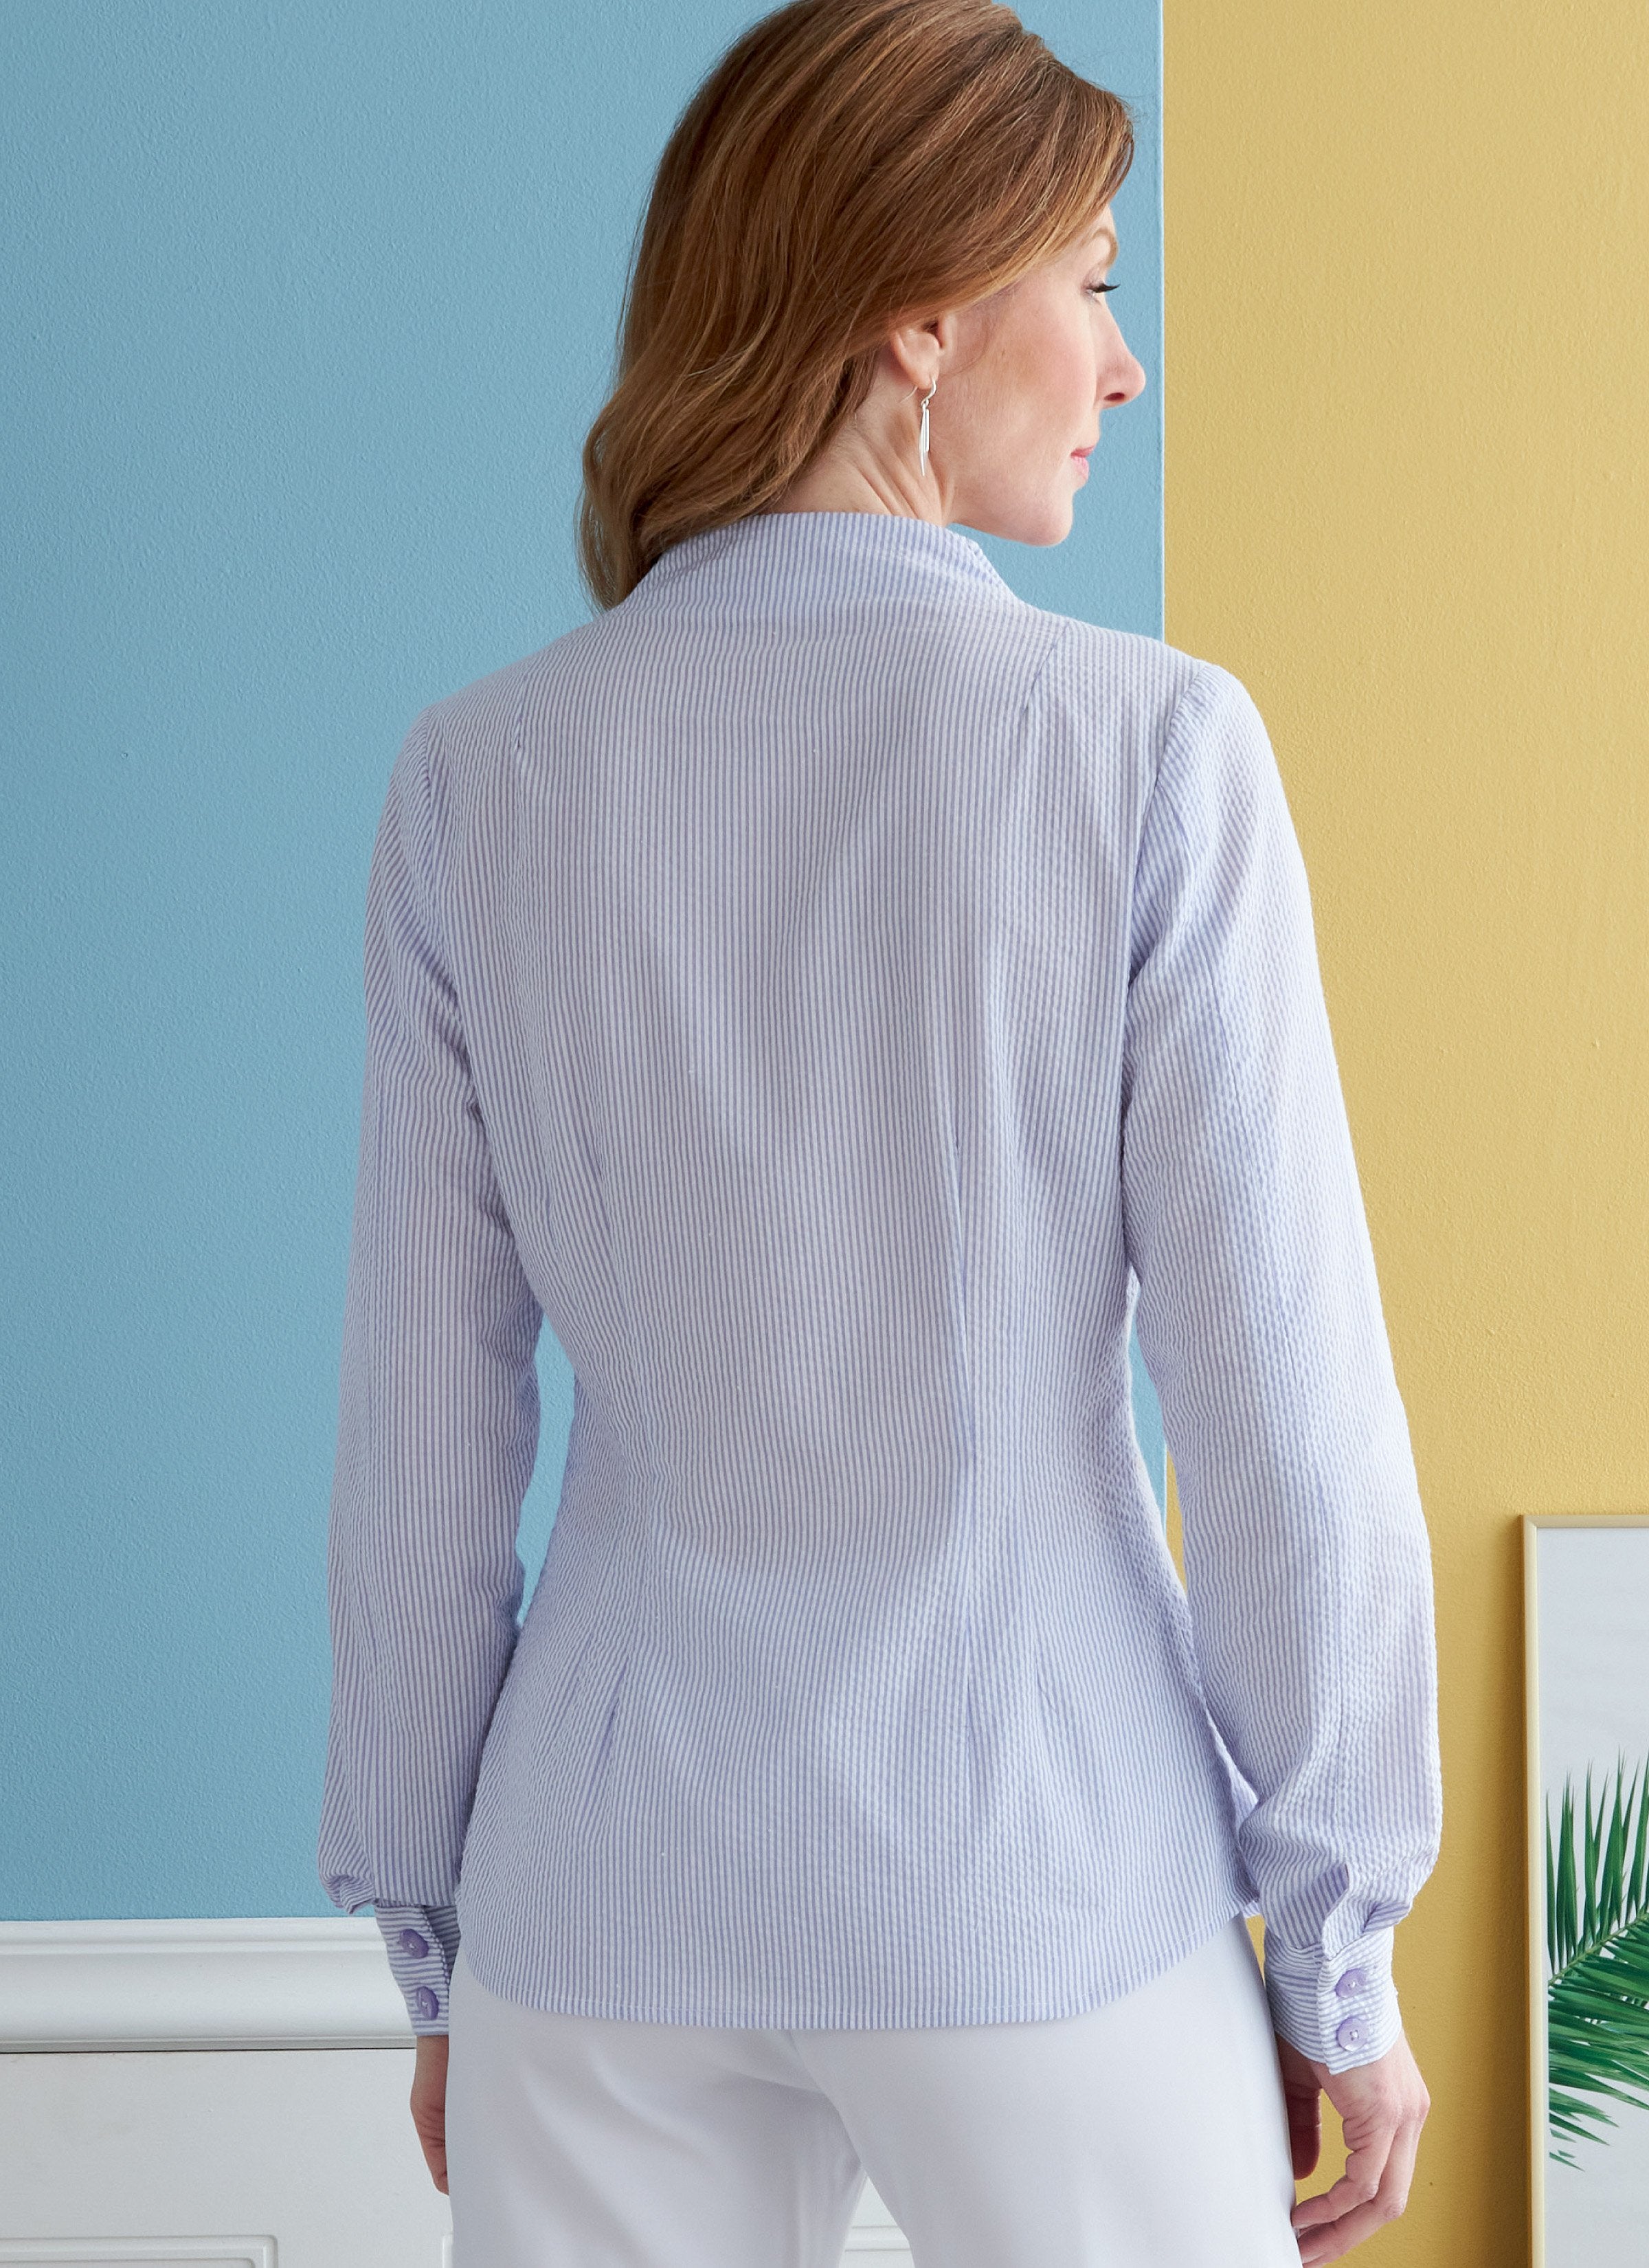 Butterick sewing pattern 6842 Misses' Fold-Back Collar Shirts from Jaycotts Sewing Supplies